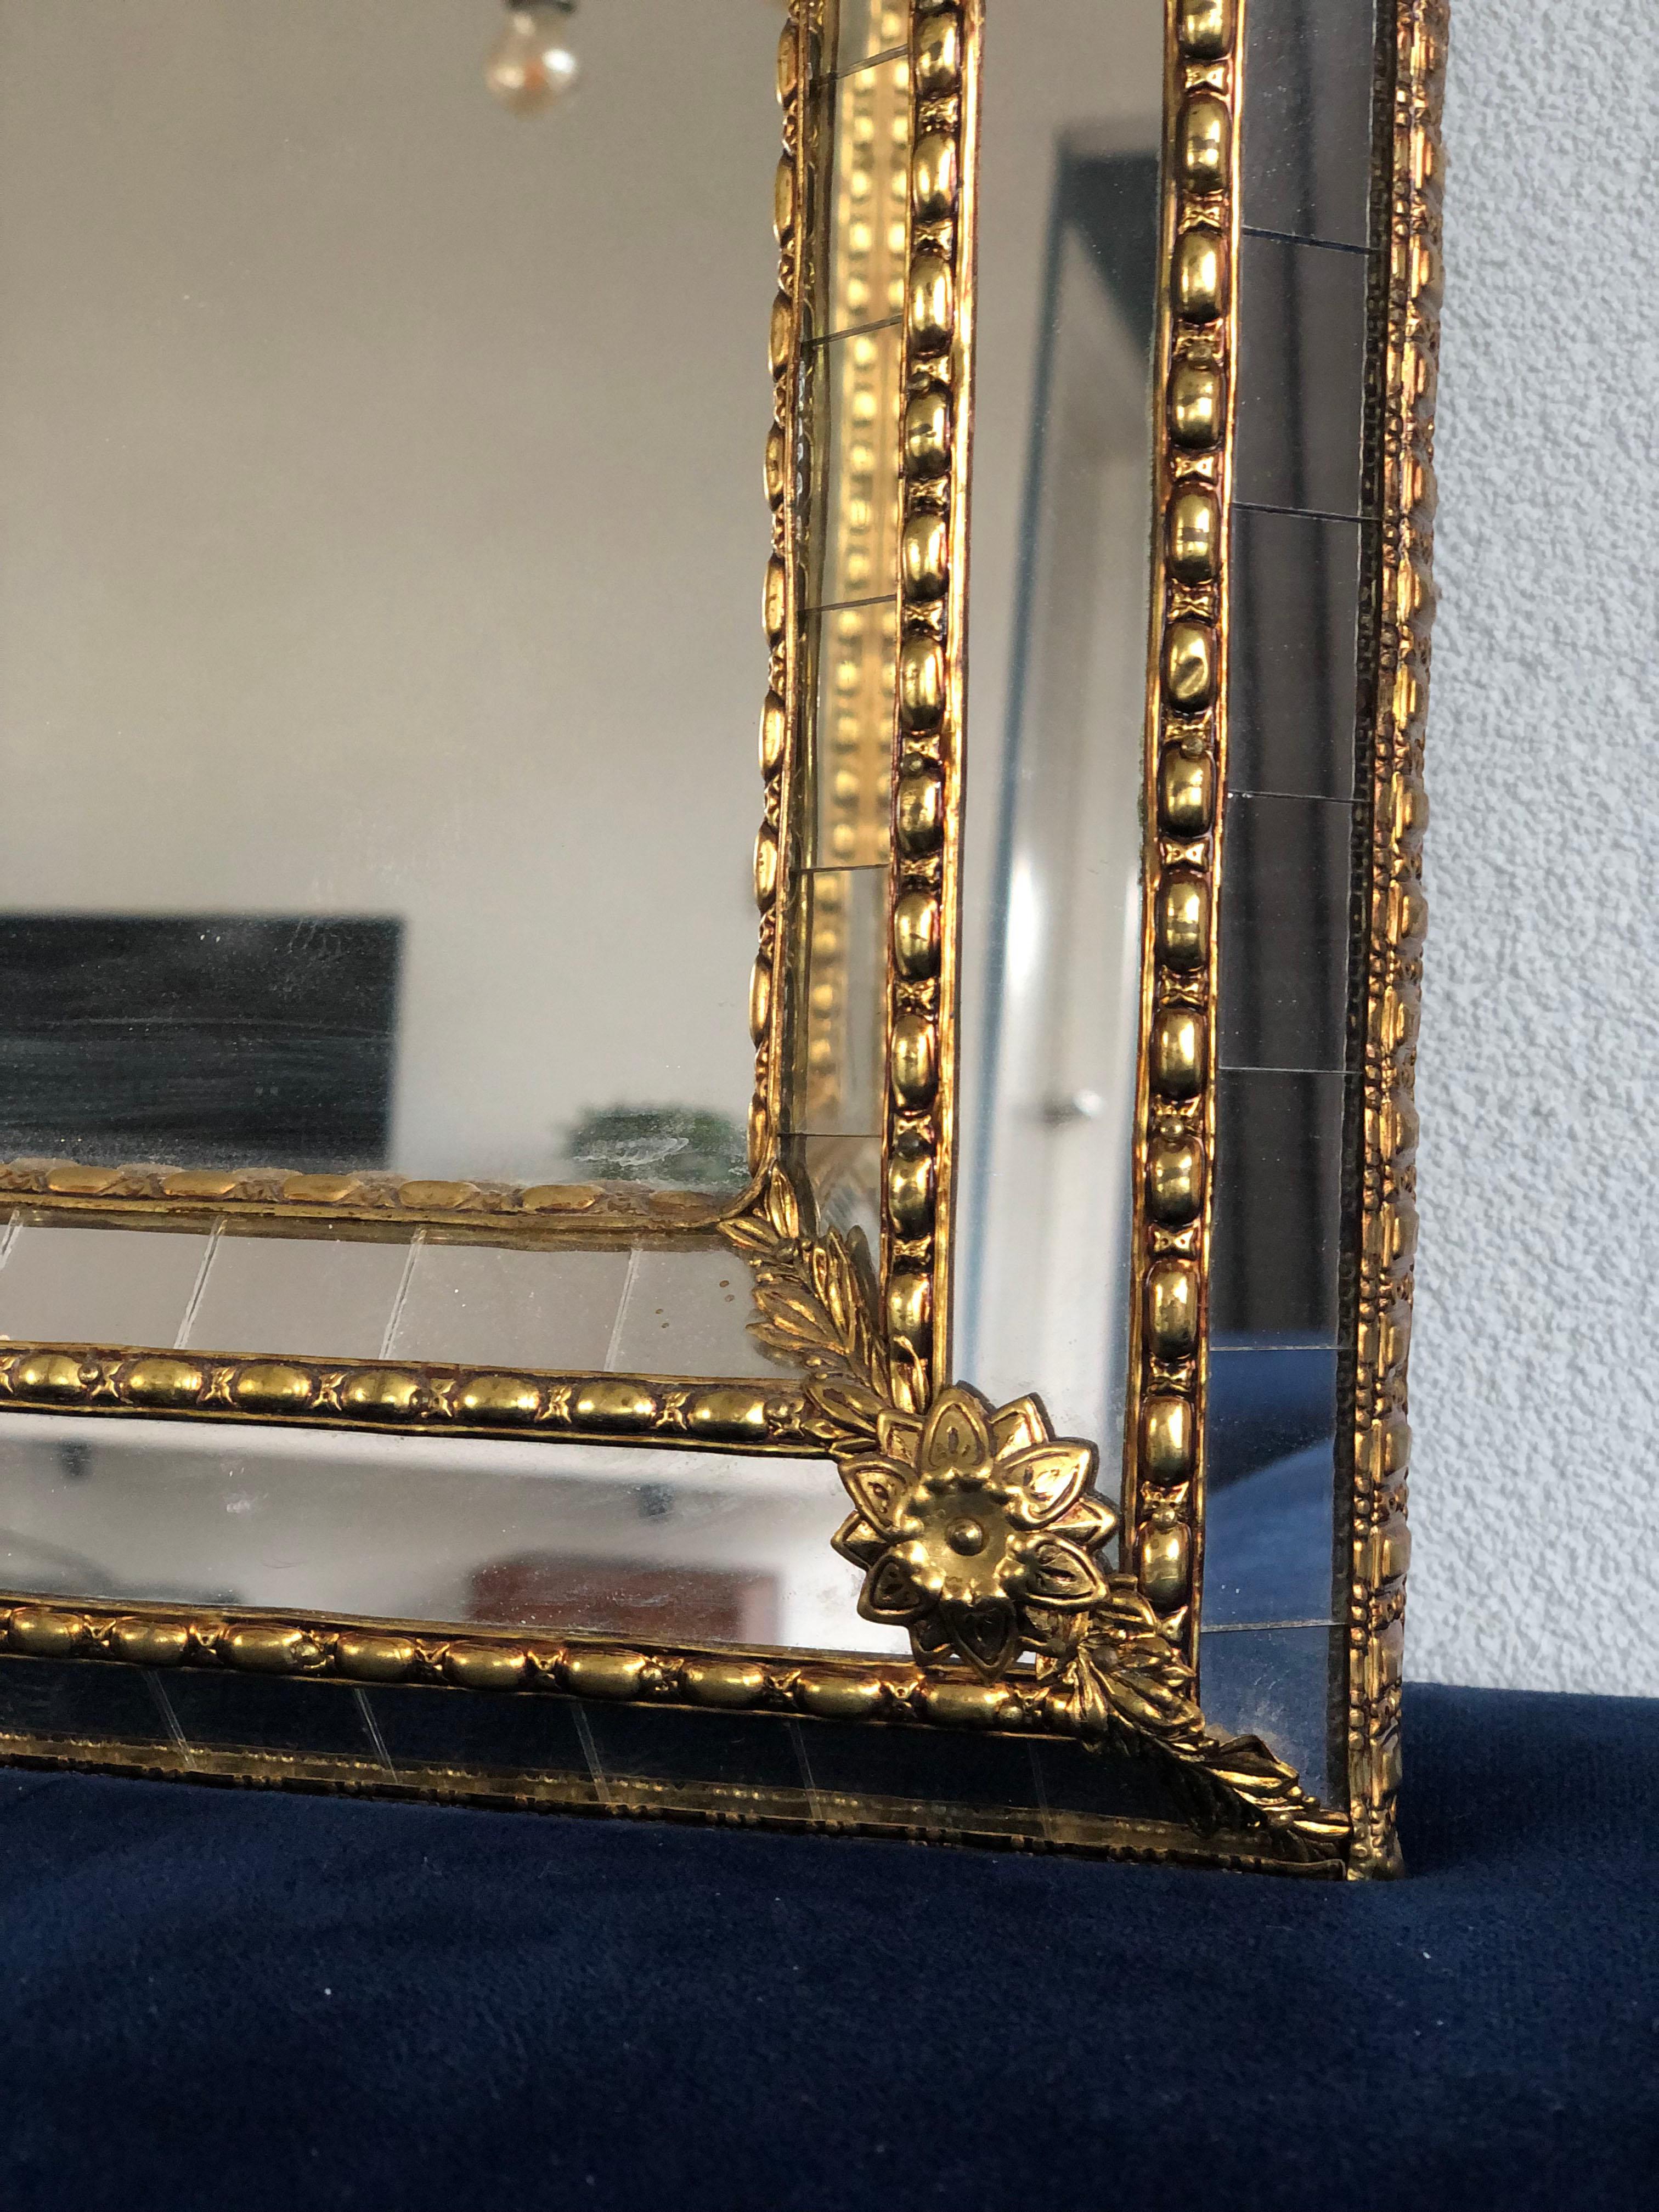 Beautiful handmade Venetian wide full length mirror from Spain 1990s. The frame has cut glass panes across the entire width, which is held together by a brass strip. The flawless mosaic trapezoidal mirror has a brass flower at each corner. 

Object: